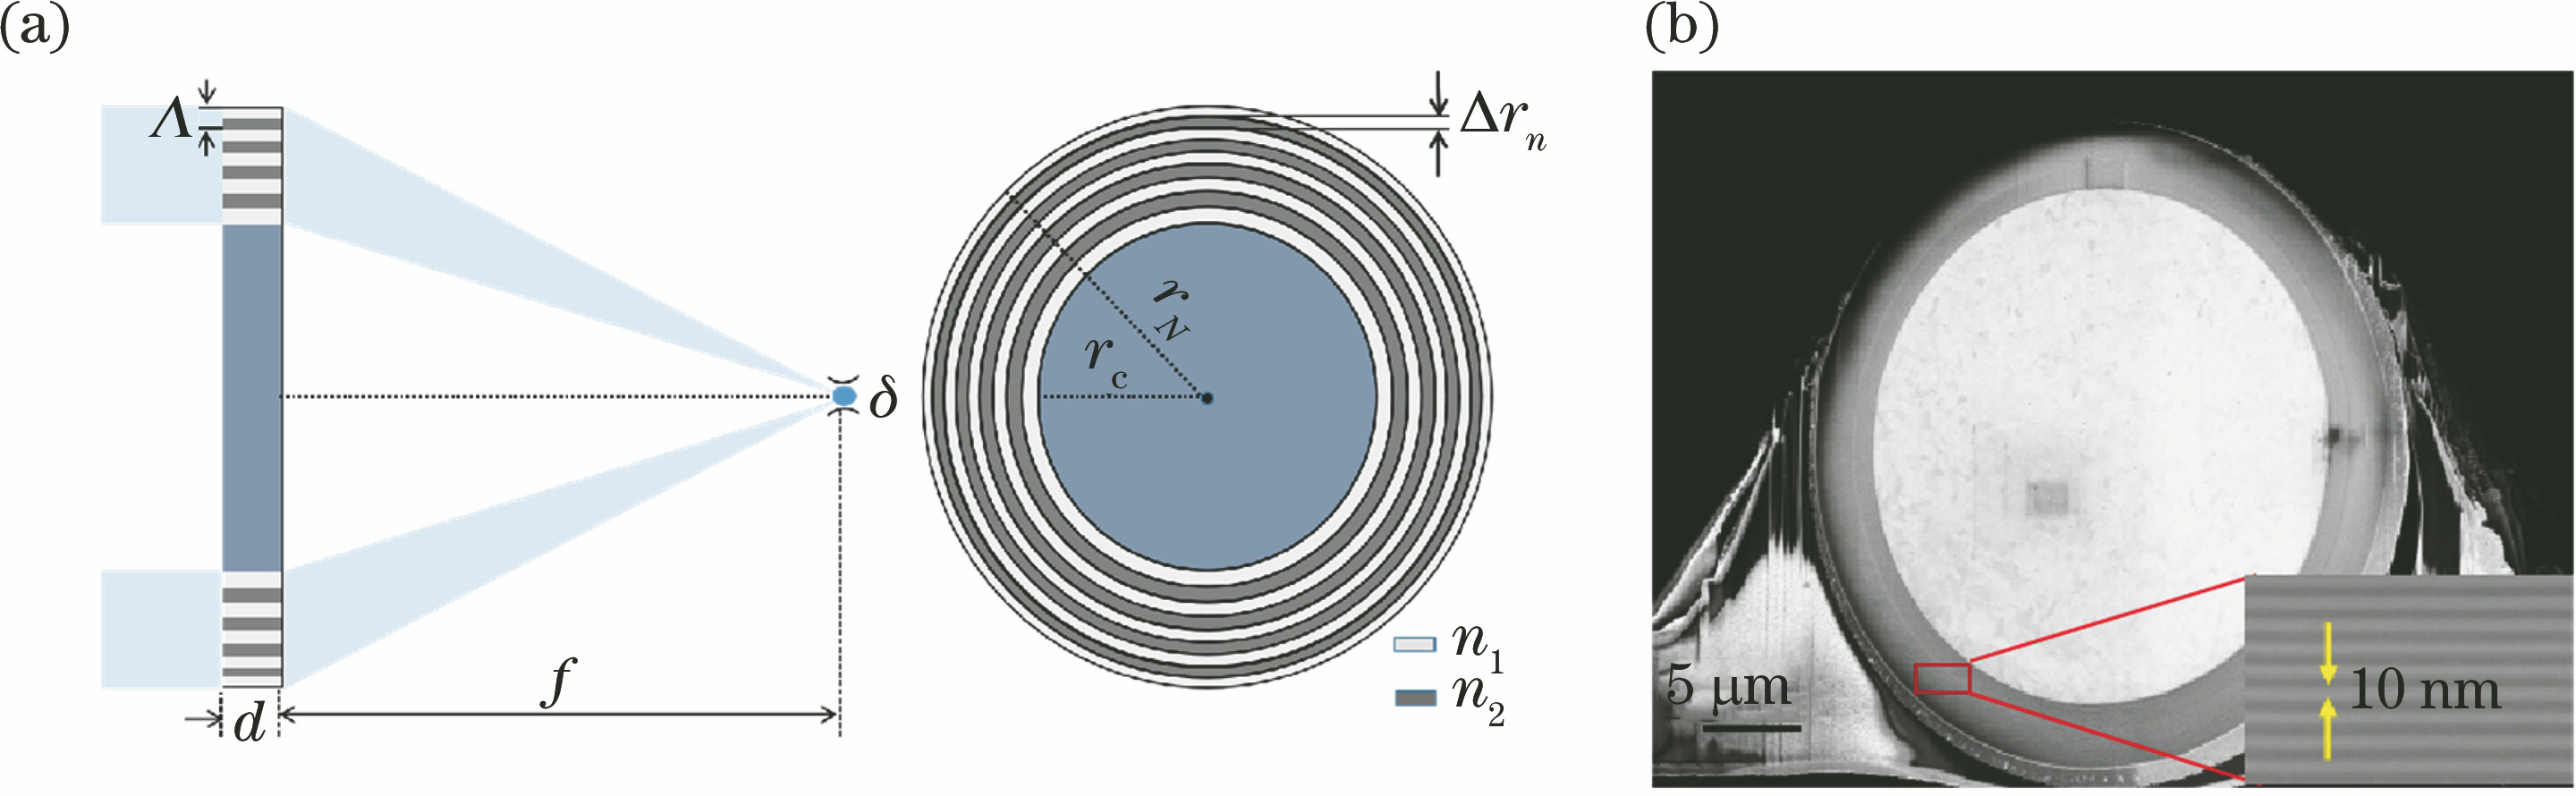 Structure of the hard X-ray FZP. (a) Schematic diagram of the PZP structure; (b) SEM image